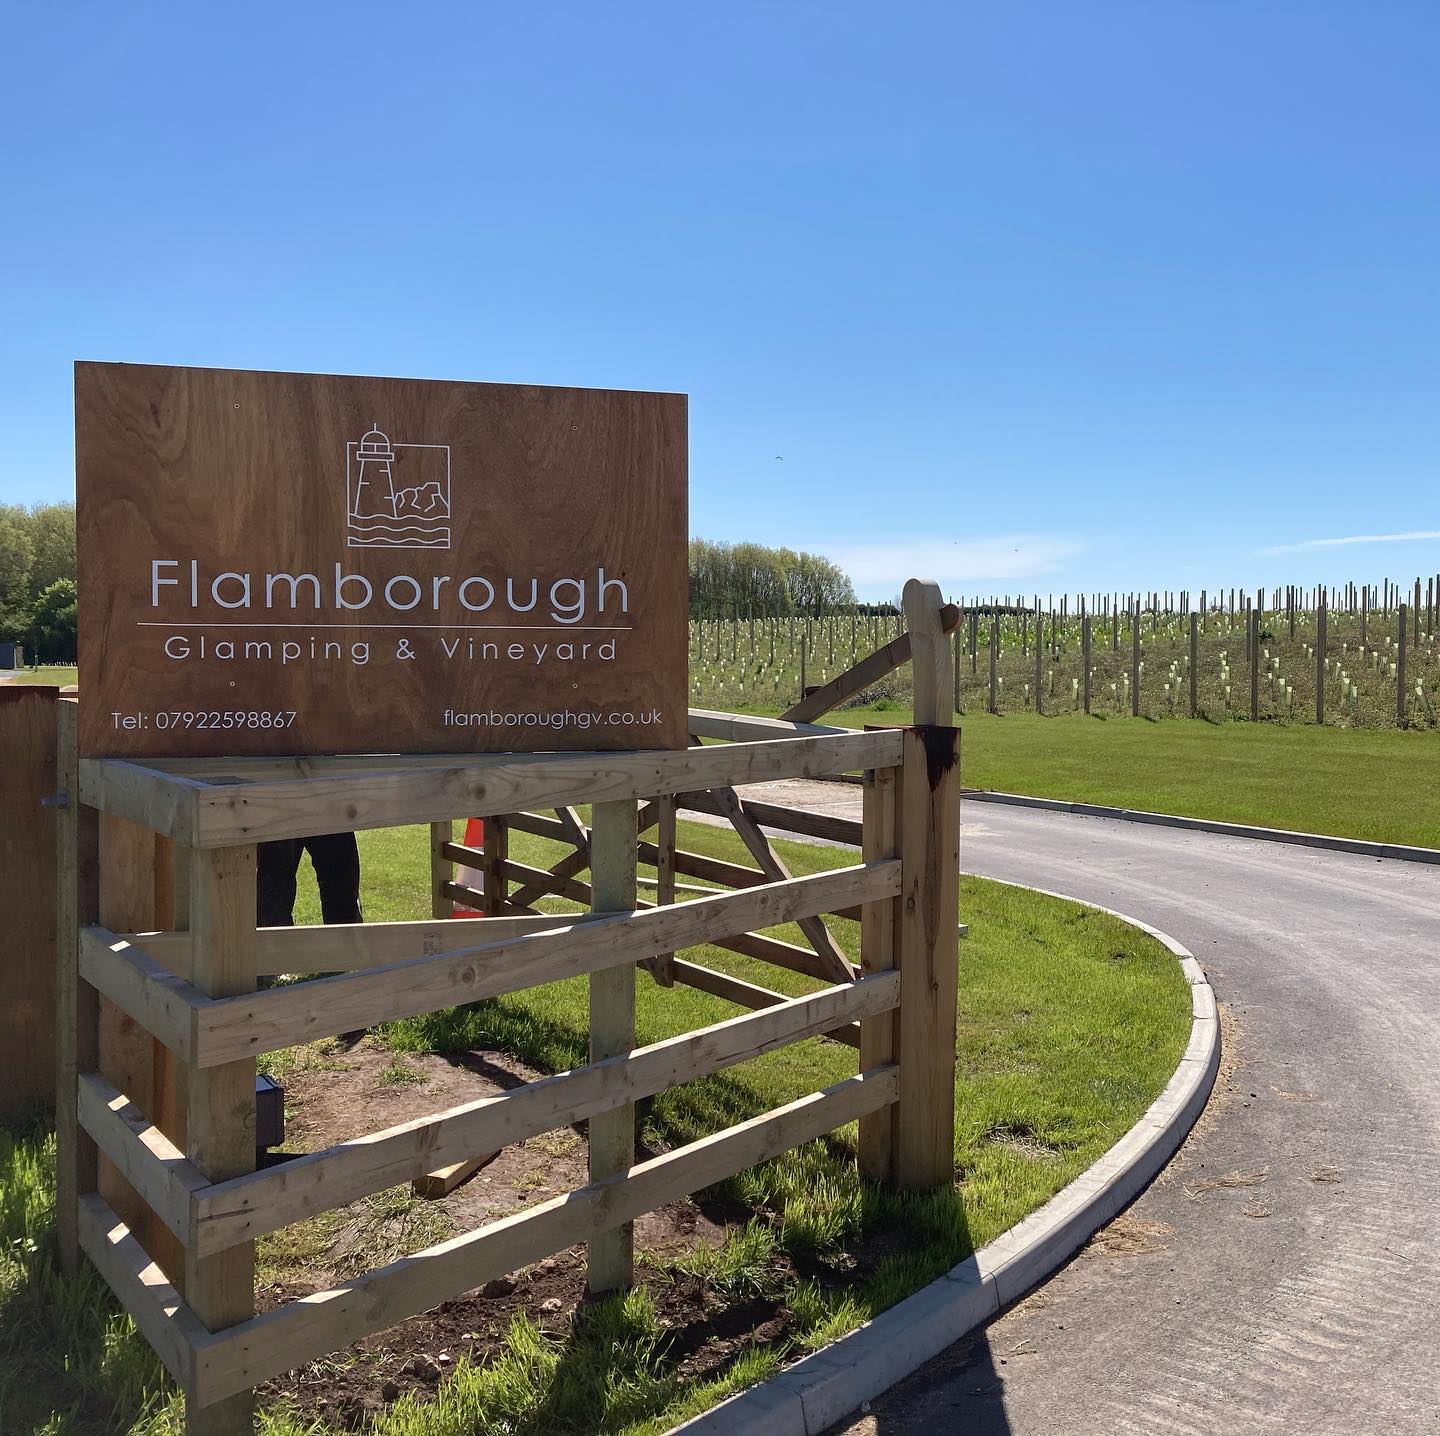 The sign outside Flamborough Glamping and Vineyard.